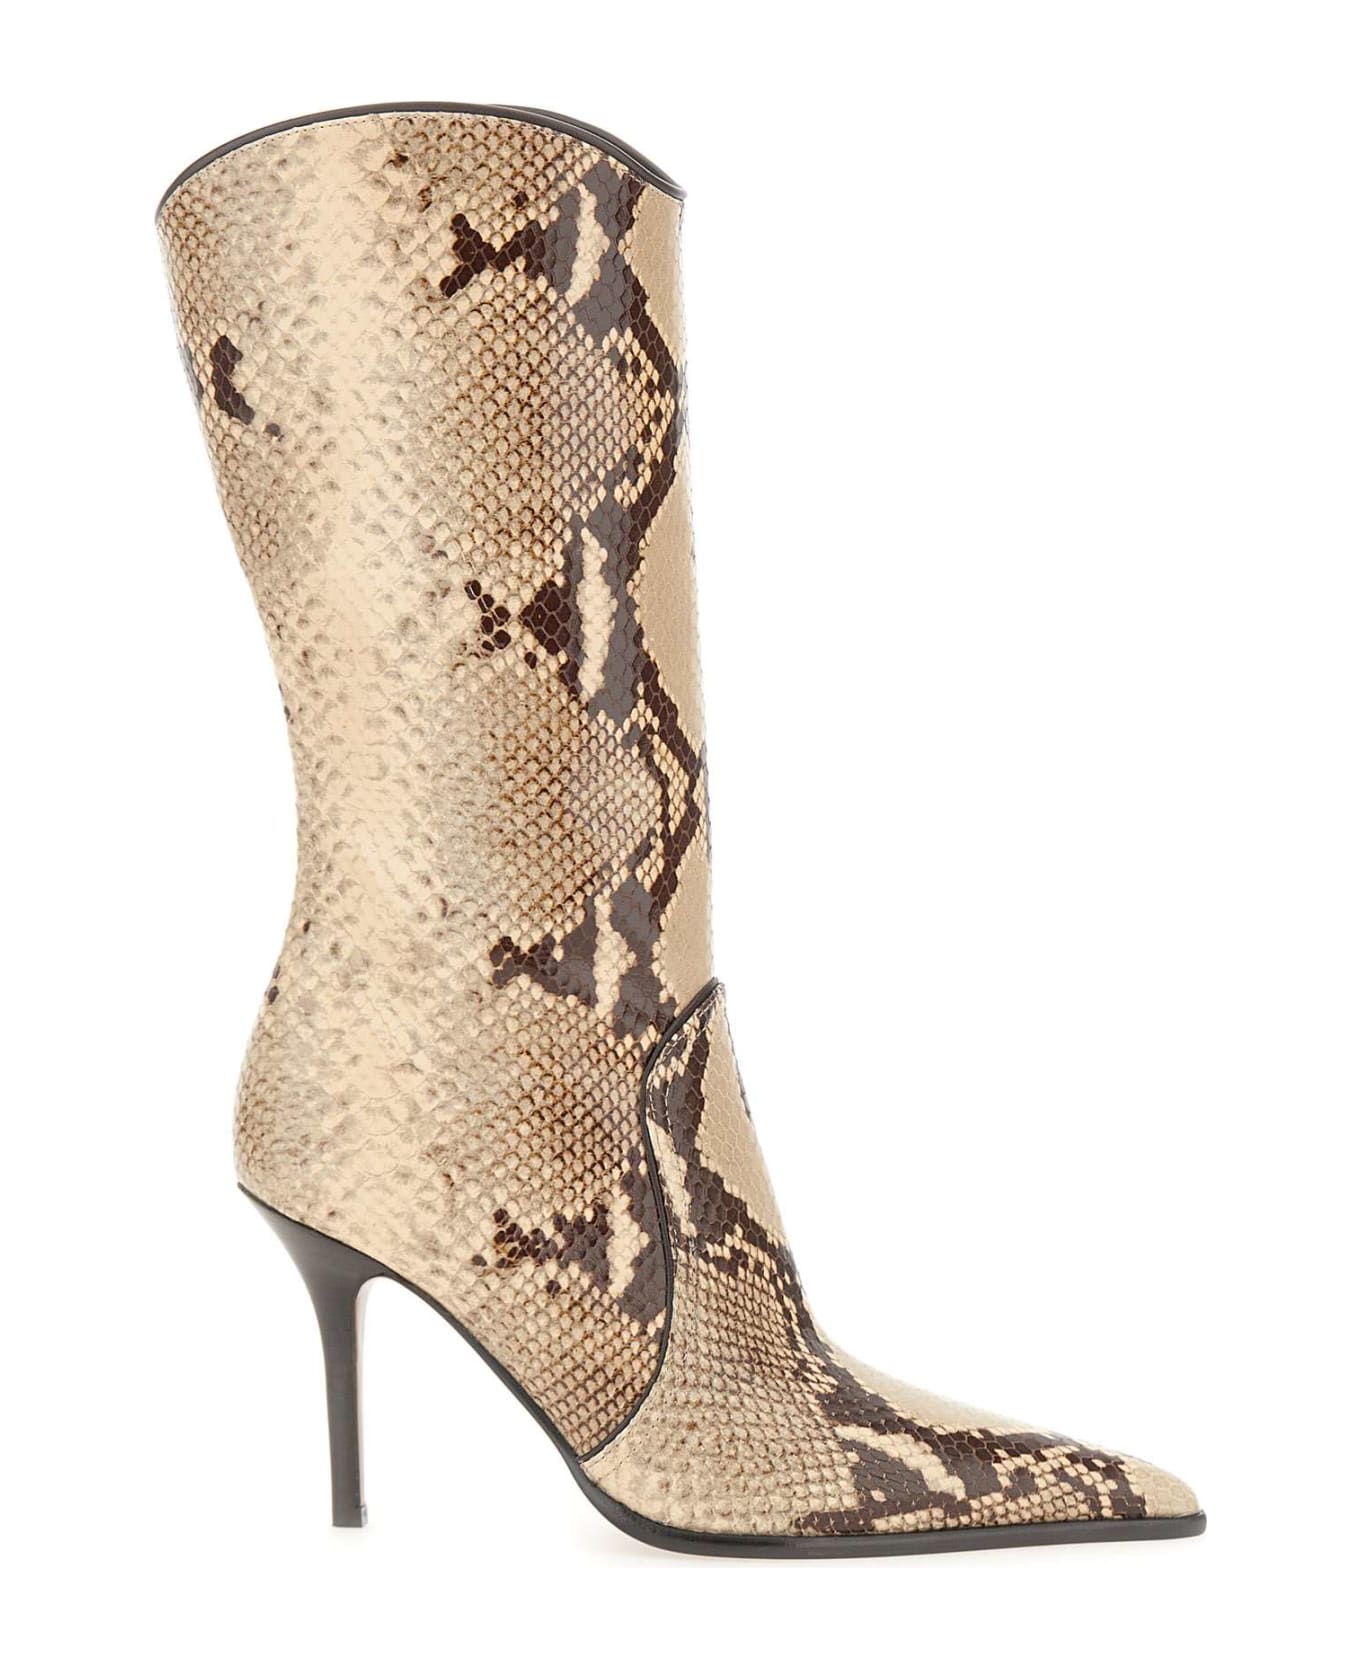 Paris Texas 'ahsley Midcalf' Leather Boots - BEIGE ブーツ